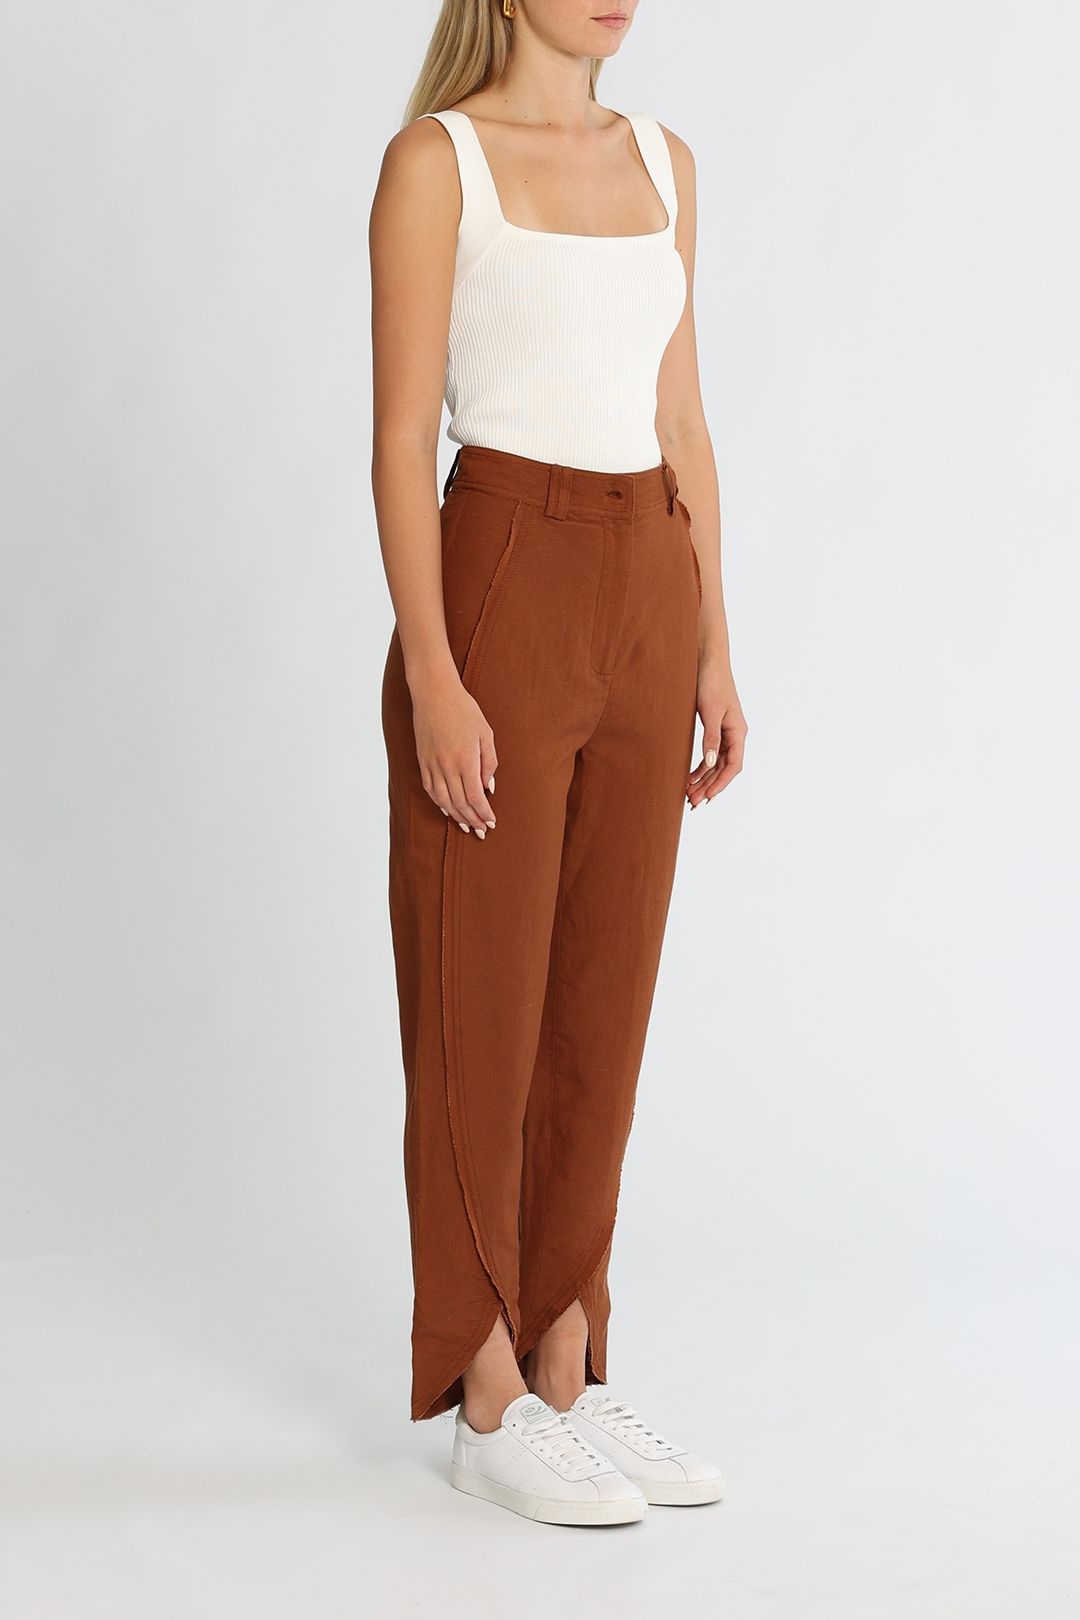 AJE Admiration Pant Coffee Cropped